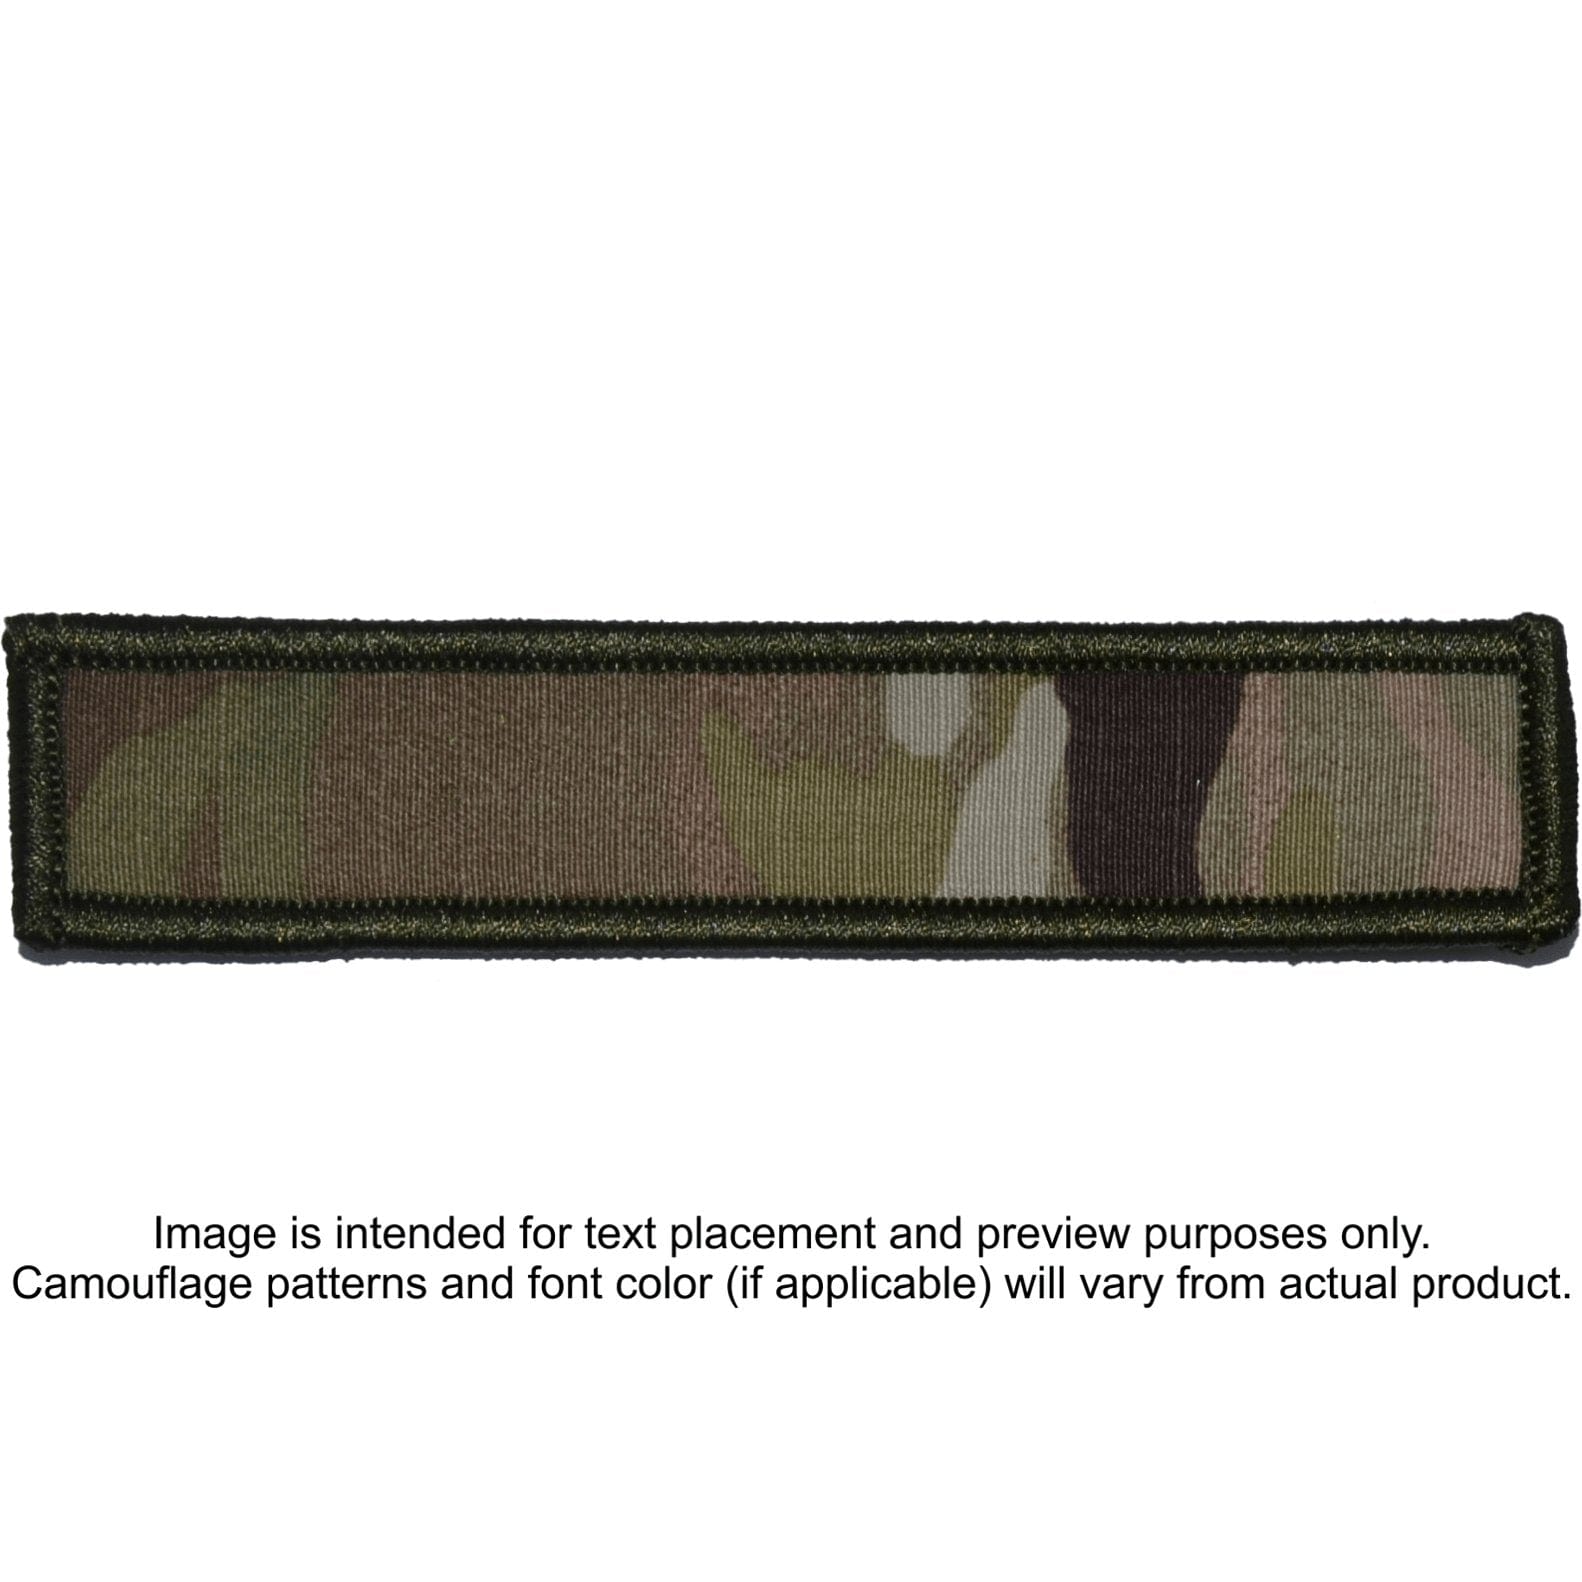 Tactical Gear Junkie Patches MultiCam / Hook Fastener Custom Reflective Patch - 1x5